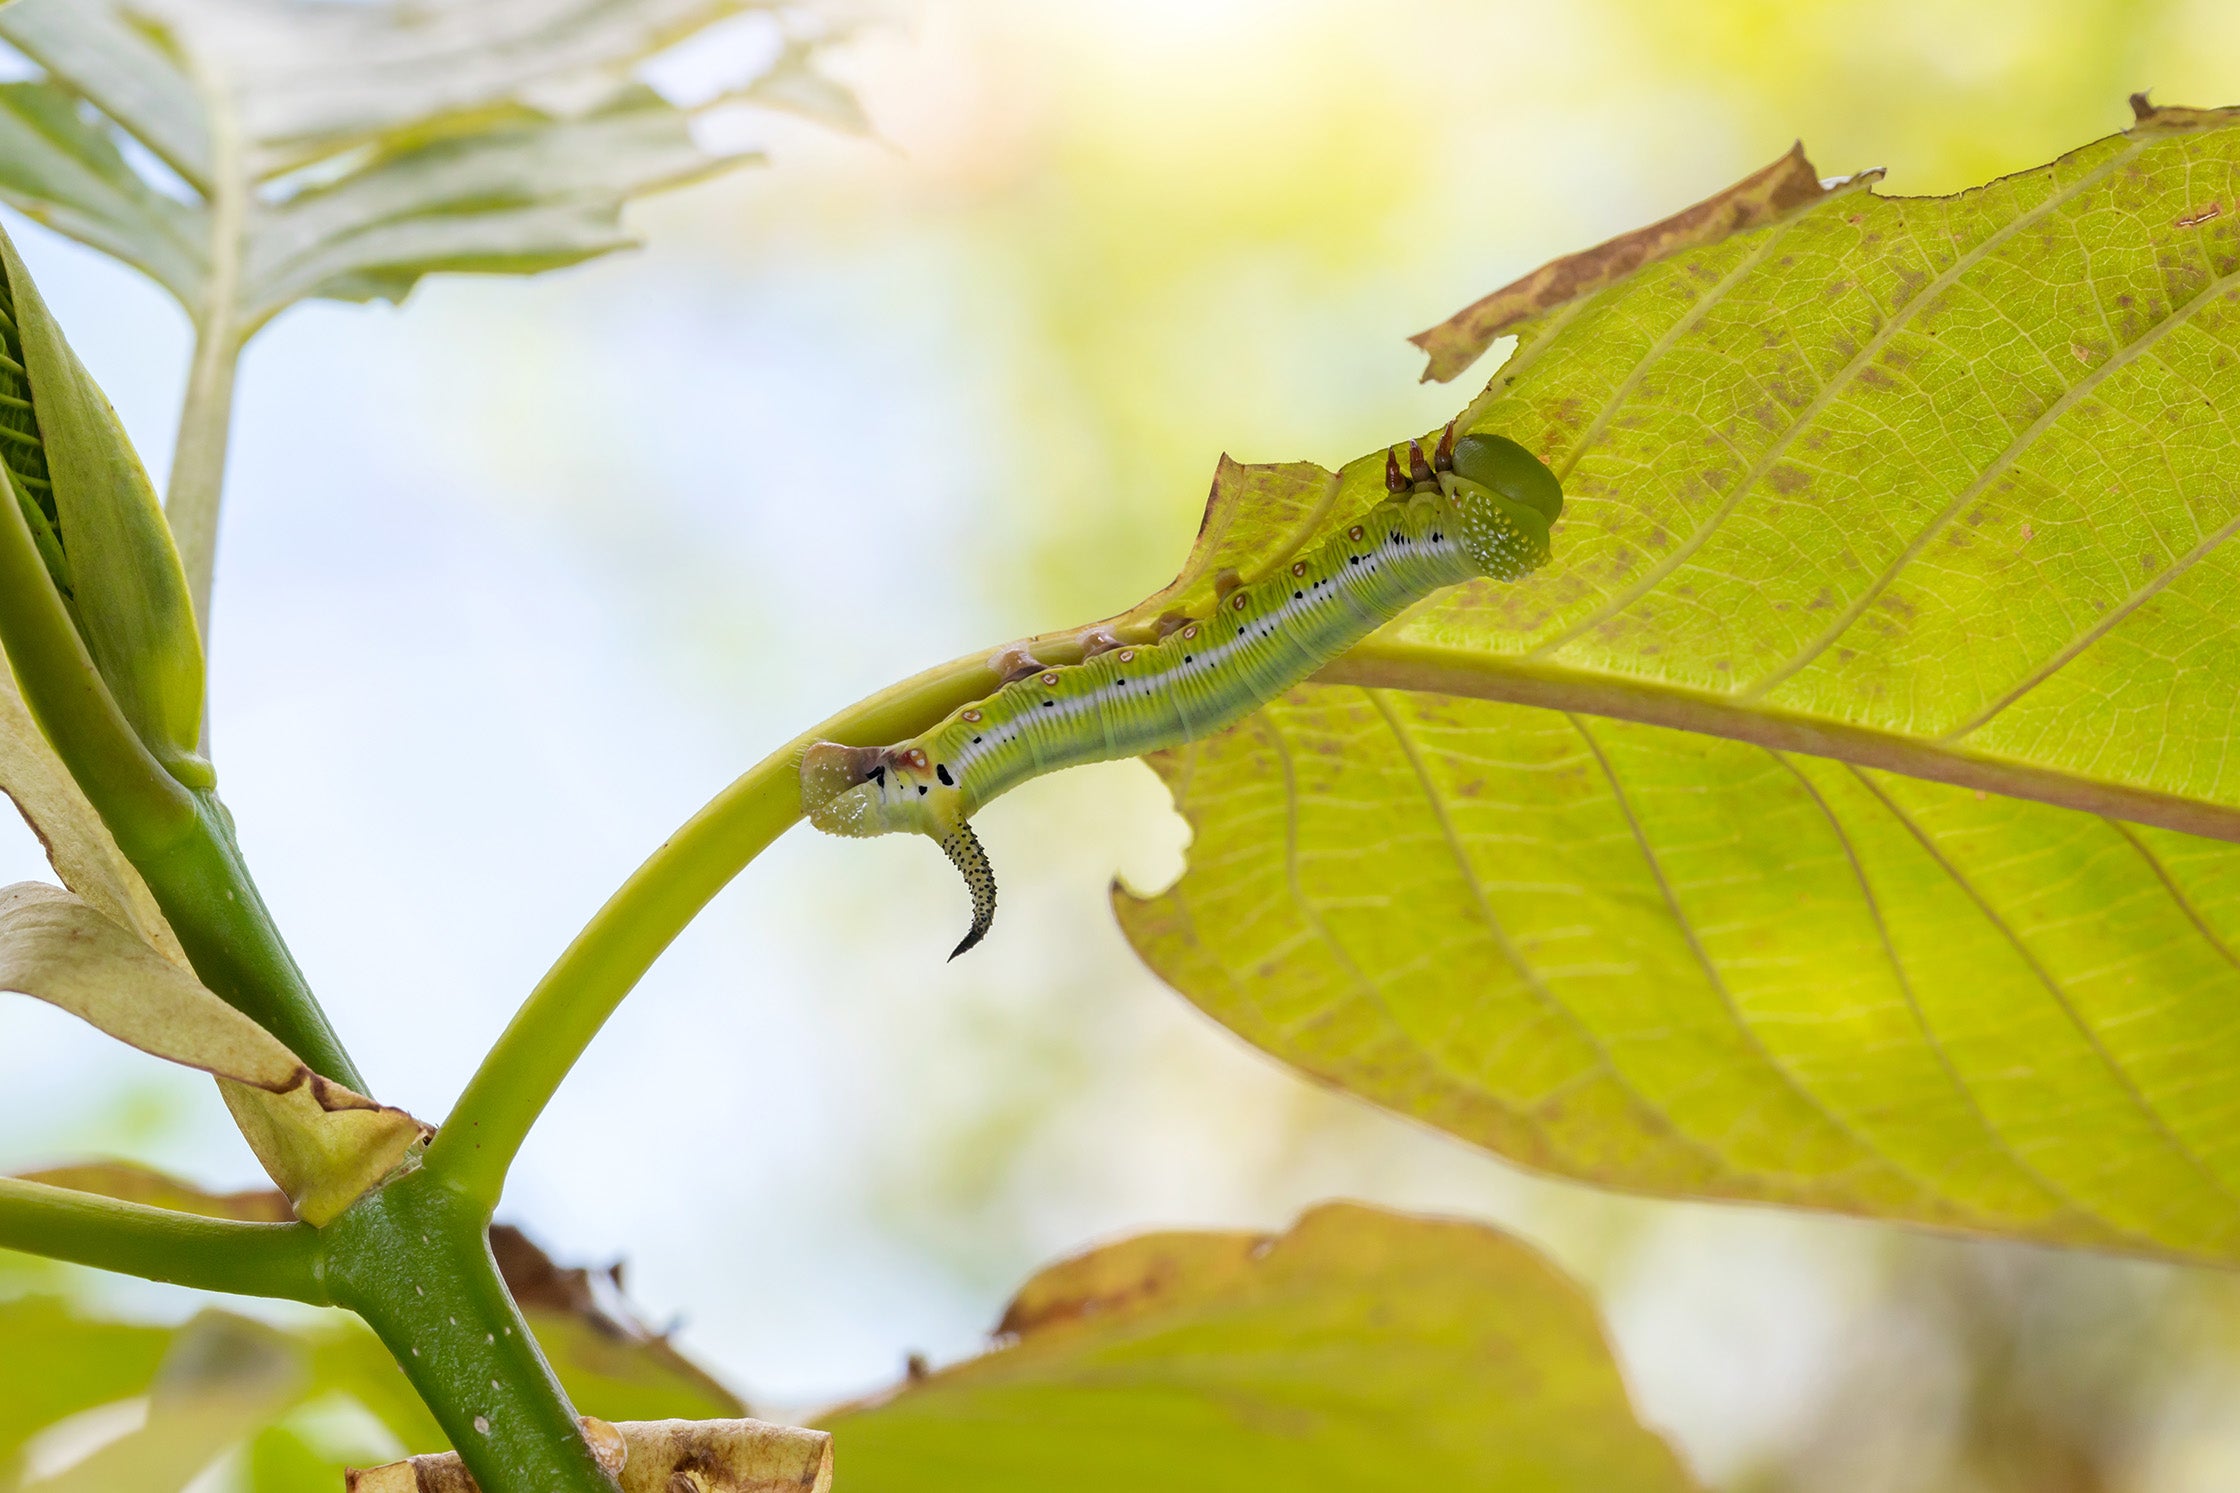 Leaf-eating caterpillars in coconut farming explained